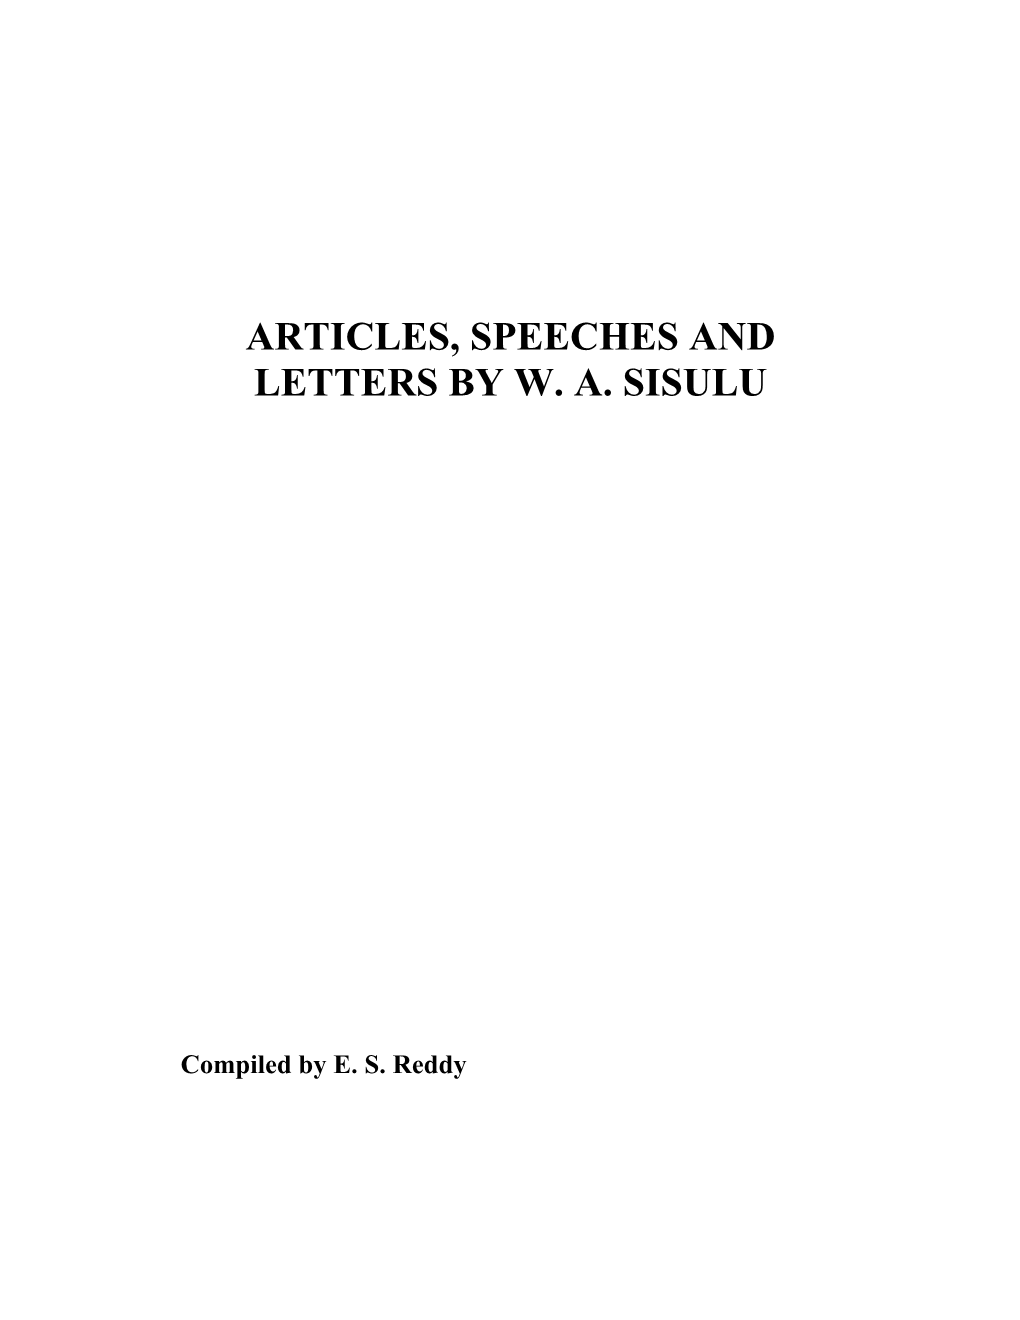 Articles, Speeches and Letters by W